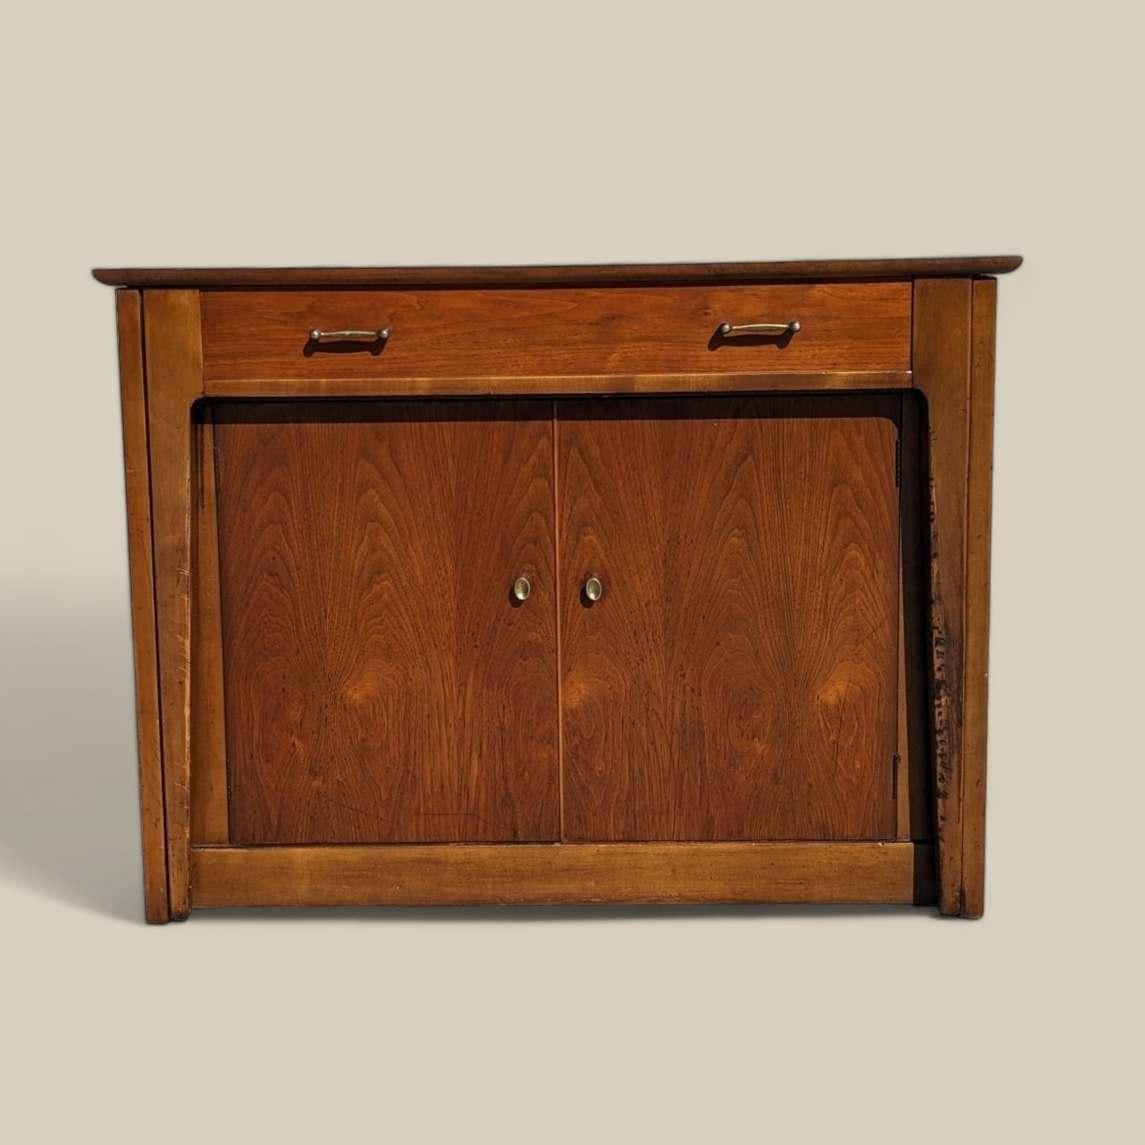 Introducing a rare and ingenious Mid-Century Modern find: the Saginaw Furniture Extendomatic Convertible Dining Table Cabinet. Crafted by Saginaw Furniture during the 1950s or 1960s, this versatile piece epitomizes the era's focus on innovative,